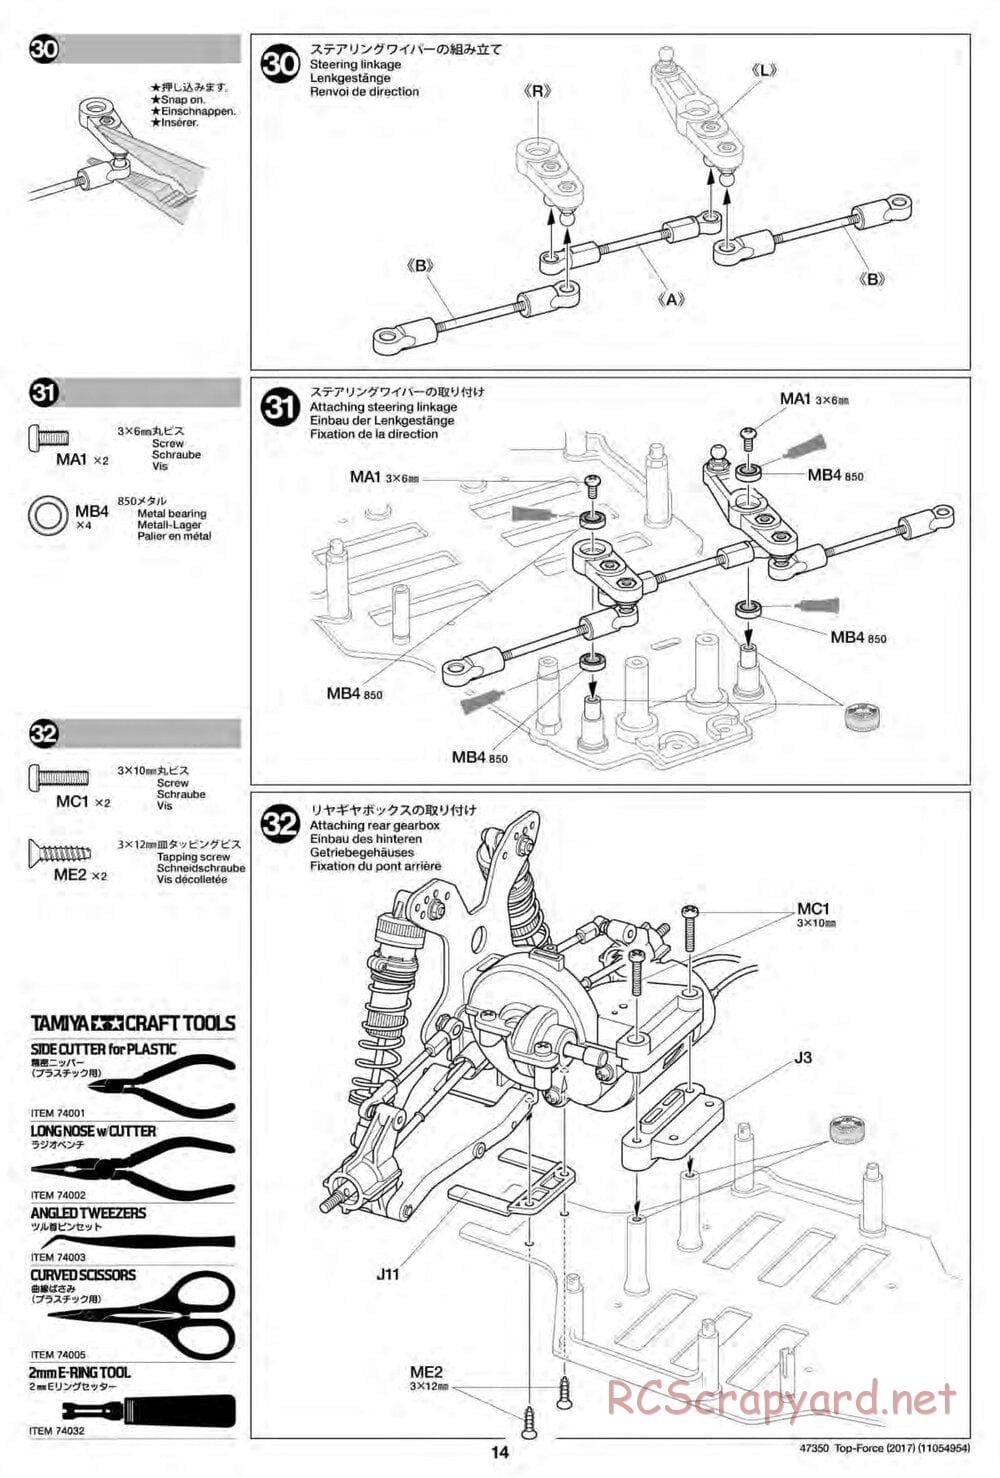 Tamiya - Top Force 2017 - DF-01 Chassis - Manual - Page 14